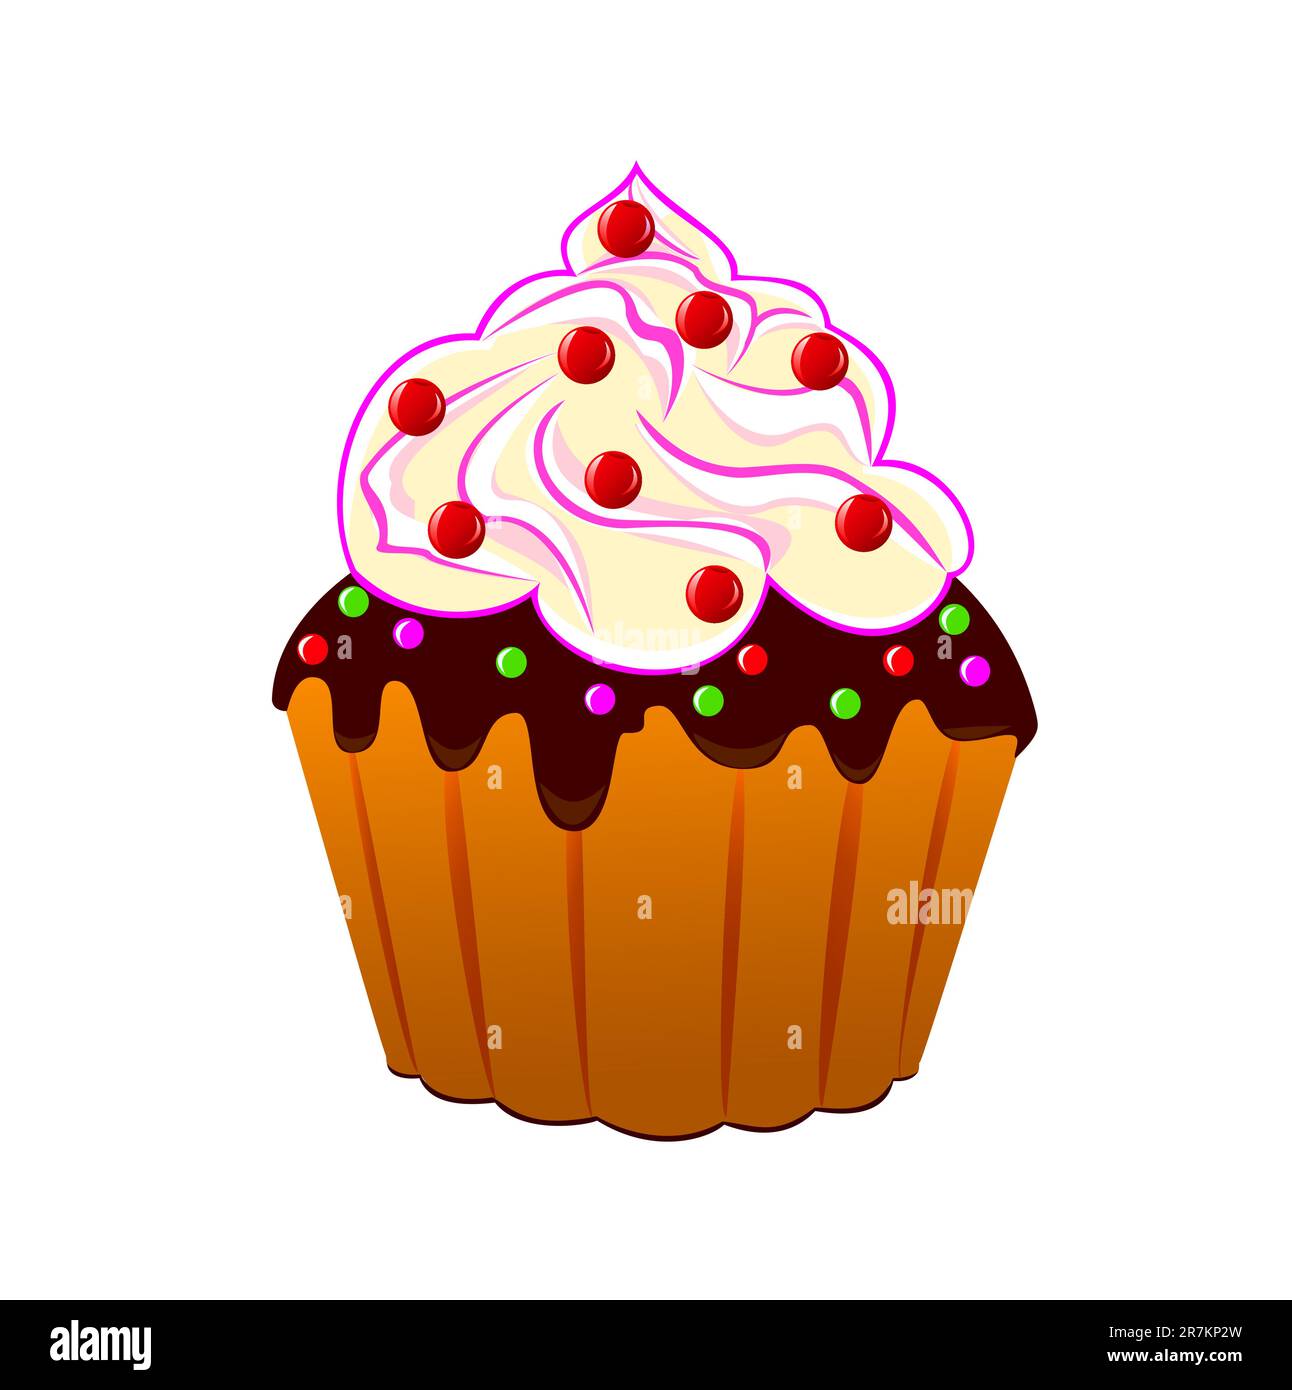 Cake with cream, decorated with red berries on a white background. Illustration has two layers. Every bits and pieces can be turned off and edited.... Stock Vector